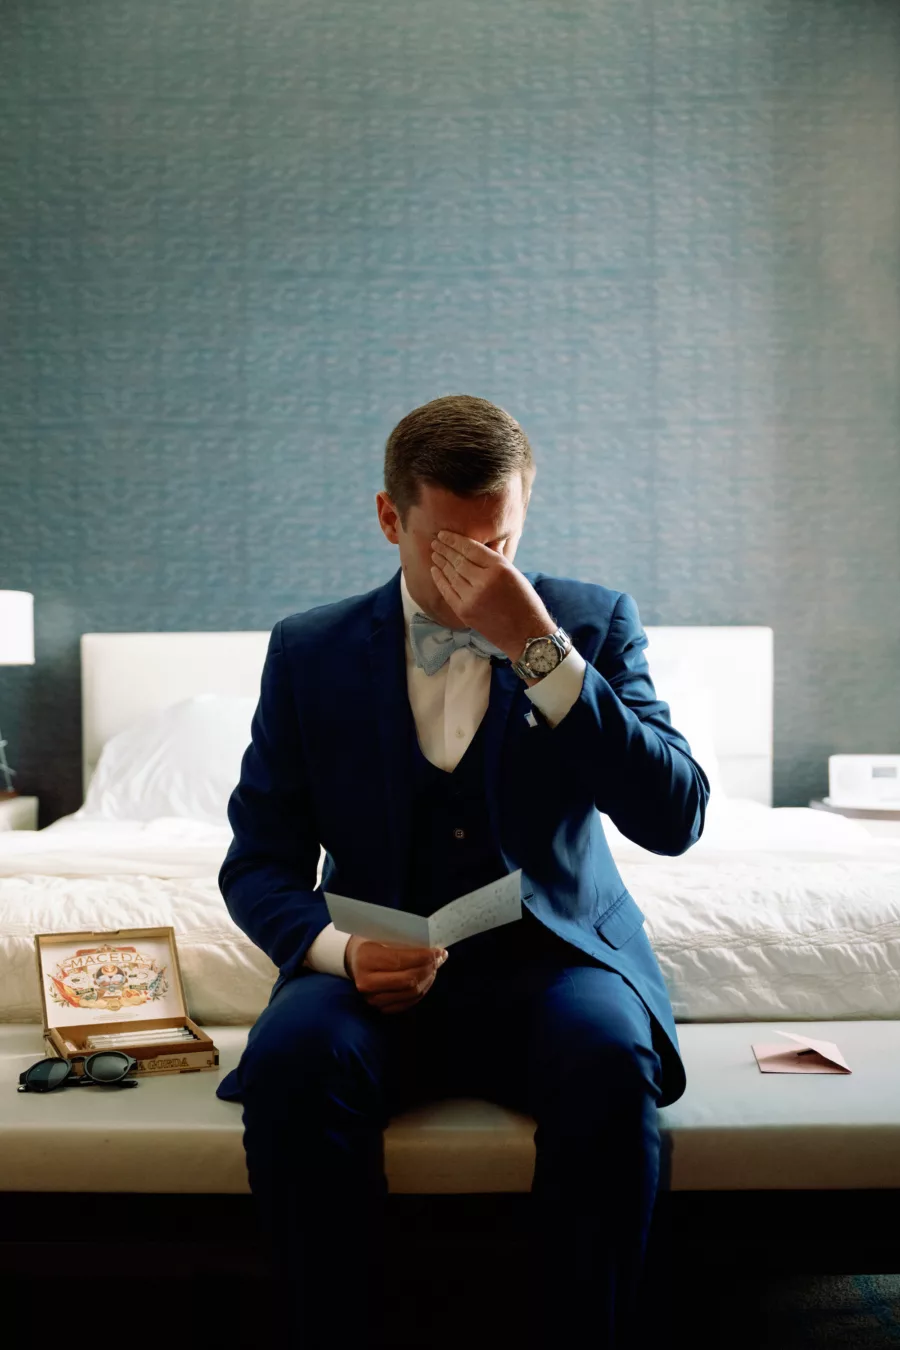 Groom Reading Letter From Bride on Wedding Day